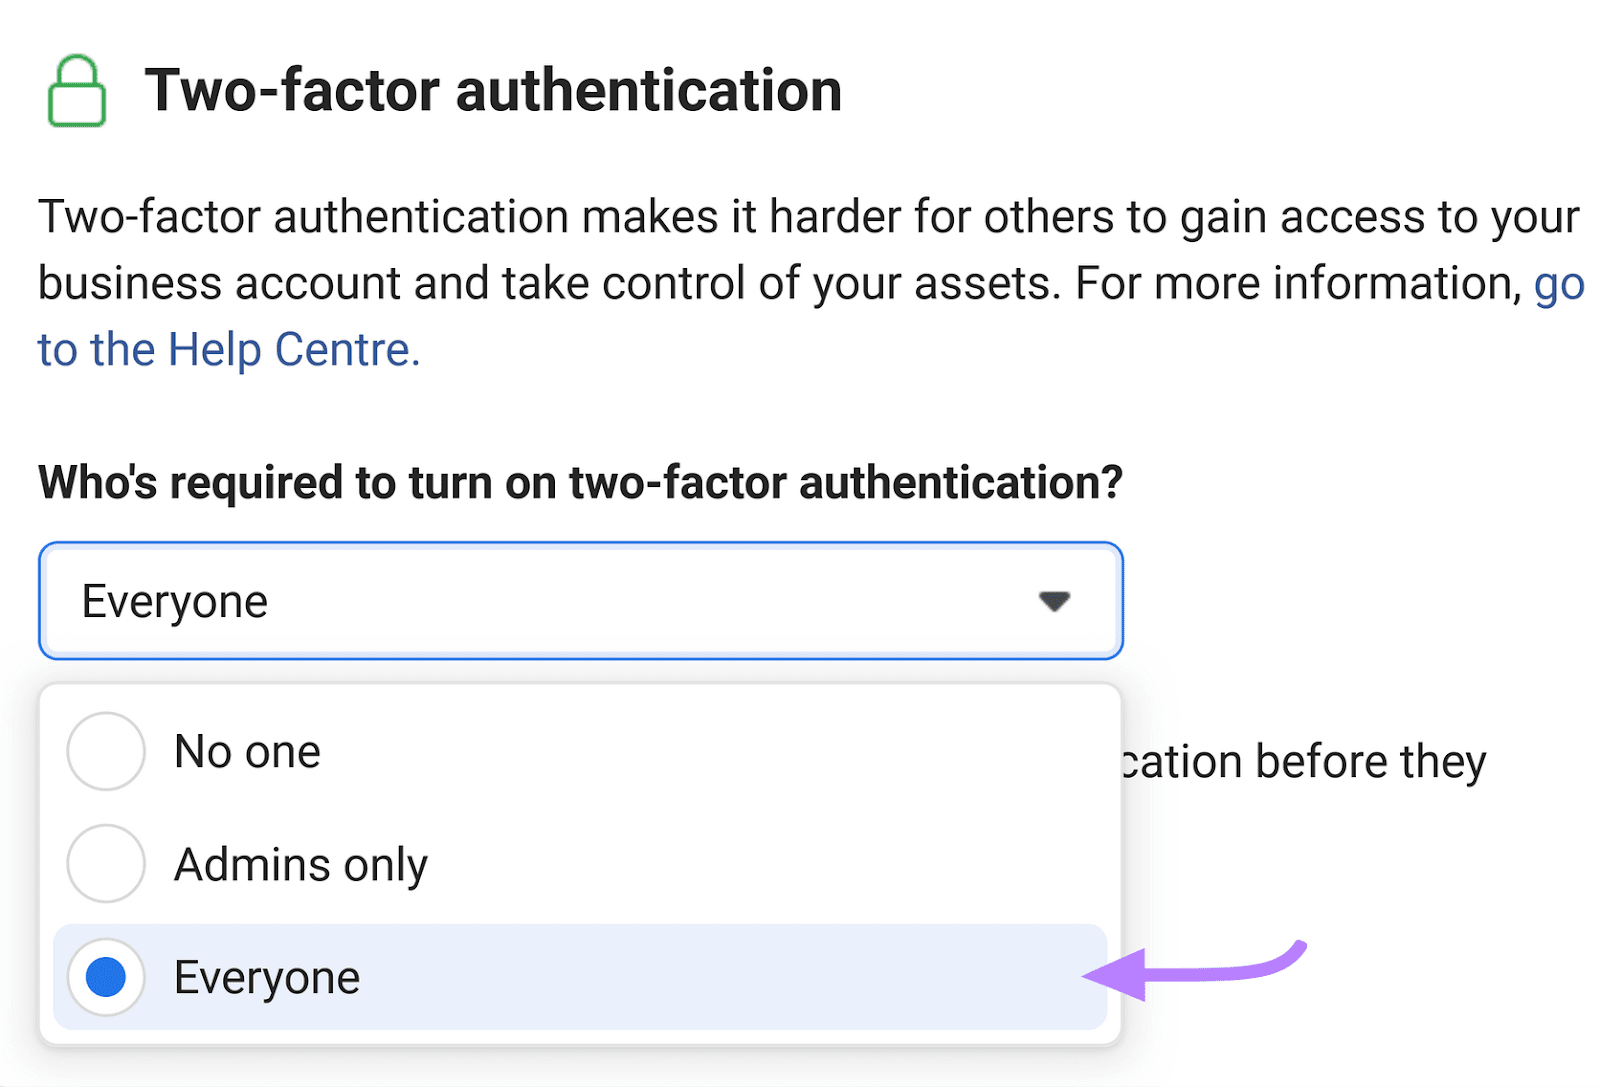 “Everyone” selected from the drop-down menu that reads "Who's required to turn on two-step authentication"